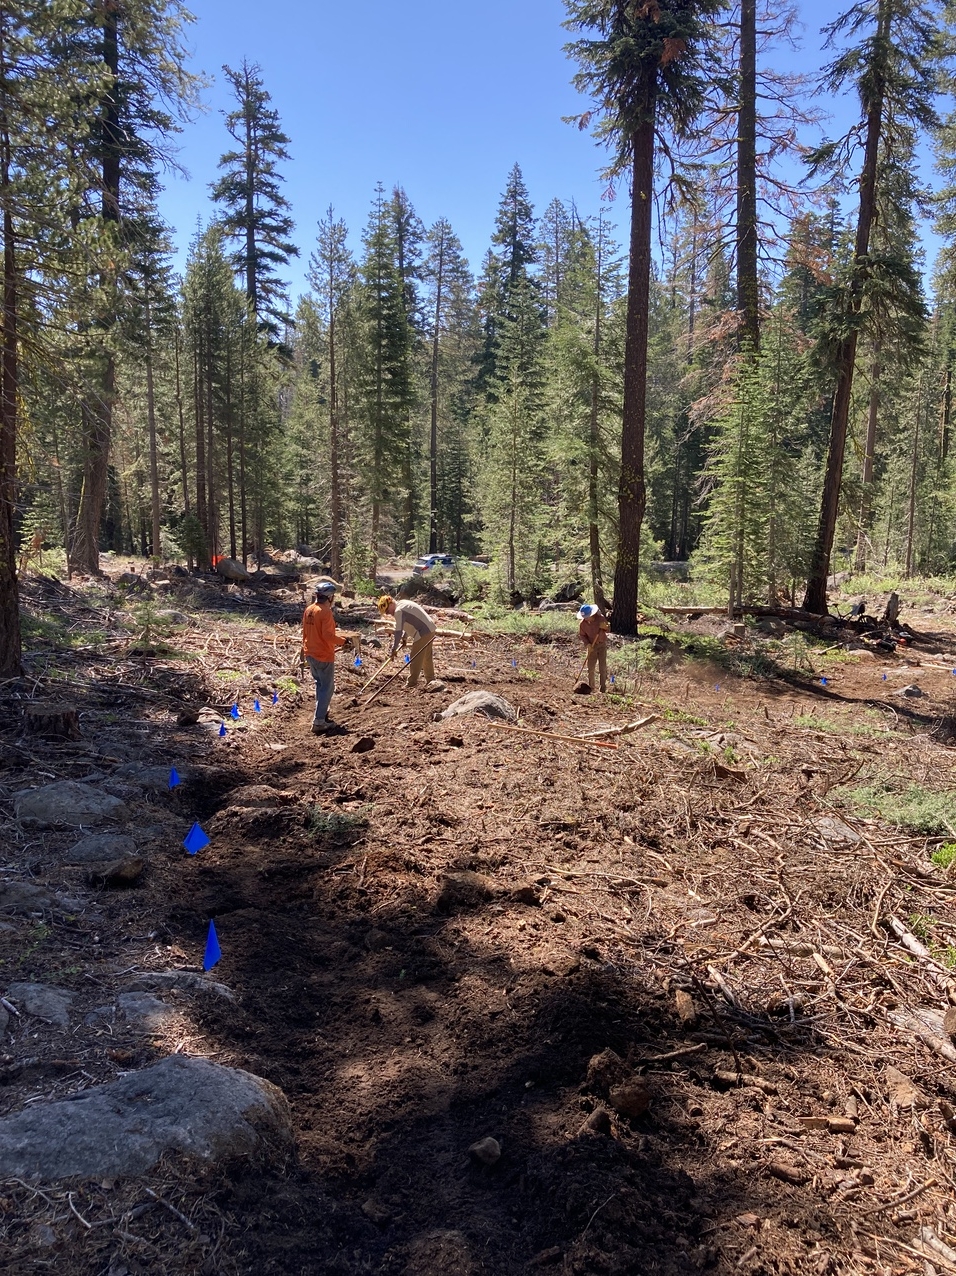 Trail Workers